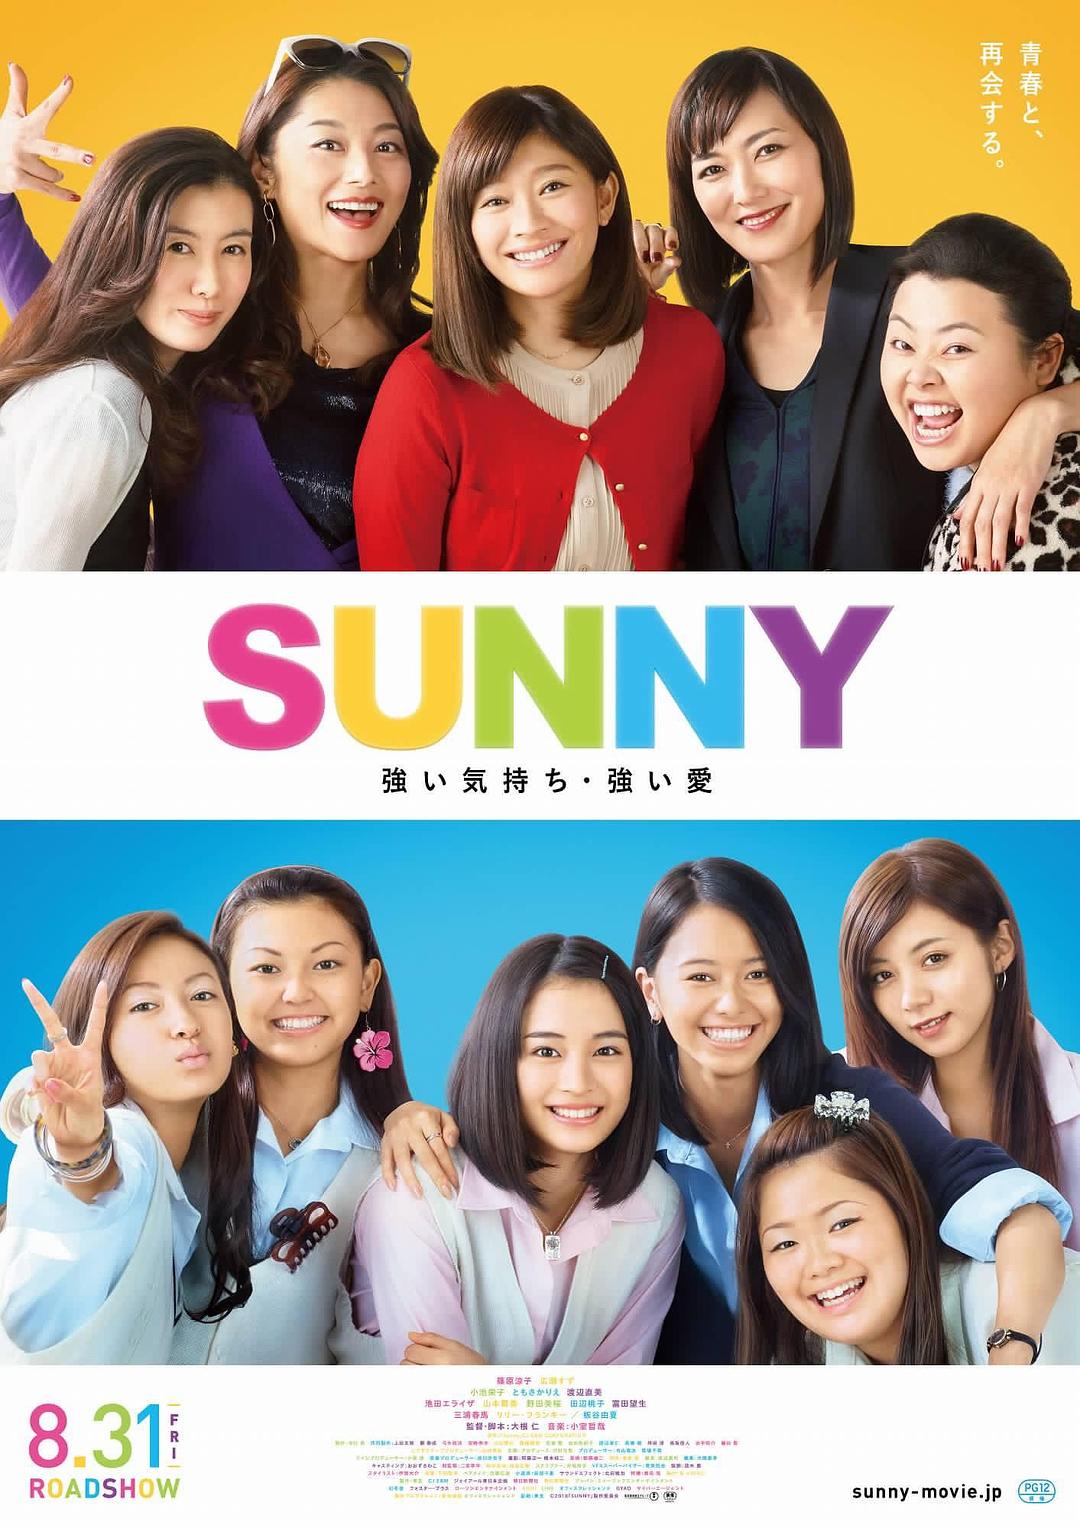  Sunny.Our.Hearts.Beat.Together.2018.JAPANESE.1080p.BluRay.x264-WiKi 9.75GB-1.png